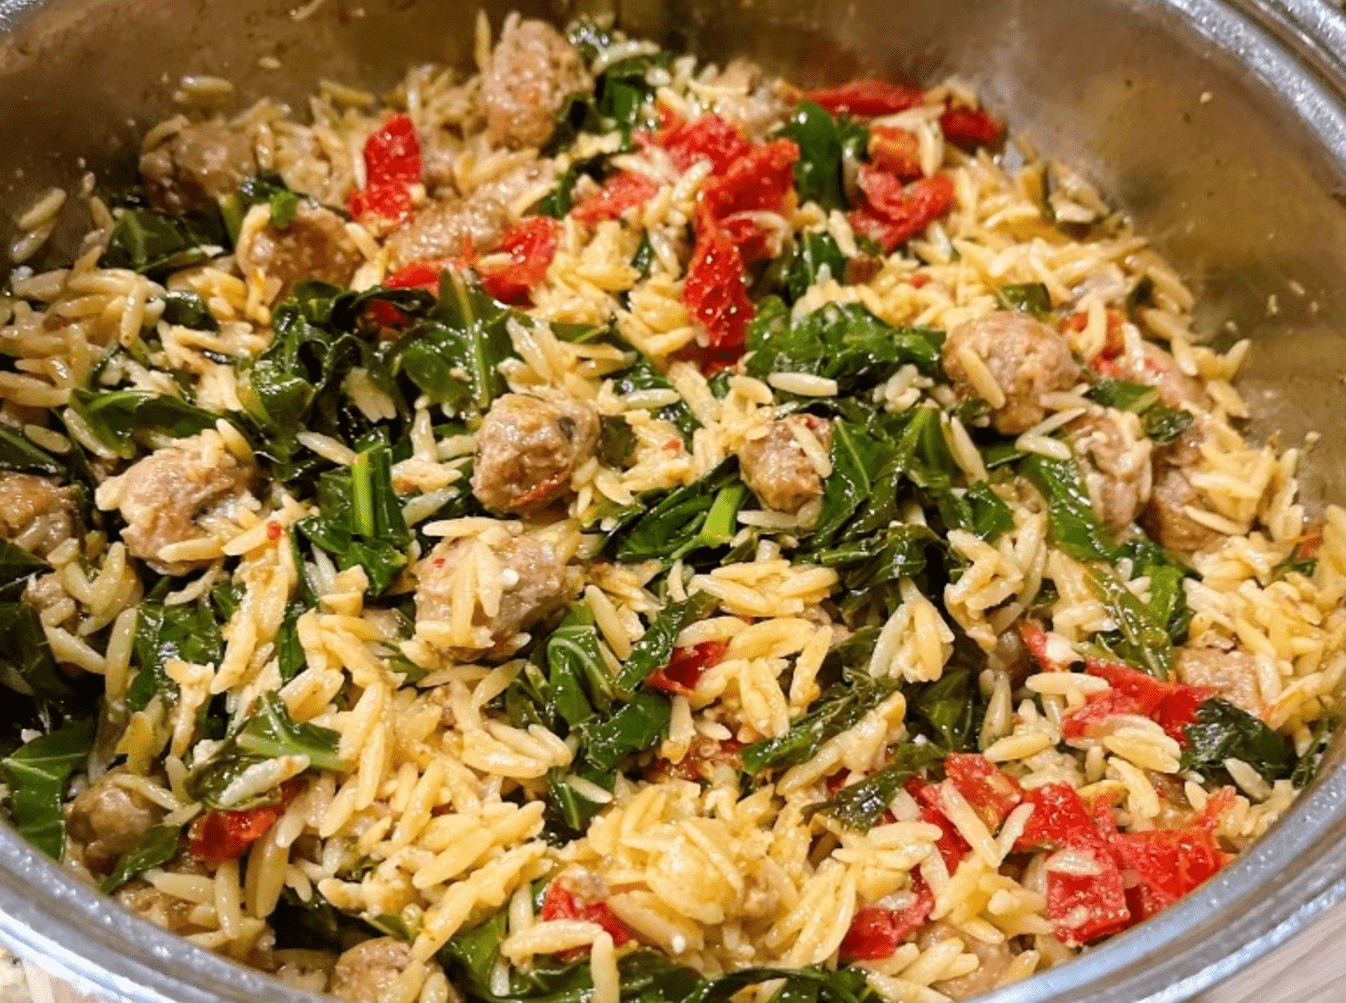 Orzo with Collard Greens, Sausage Meatballs and Sundried Tomatoes